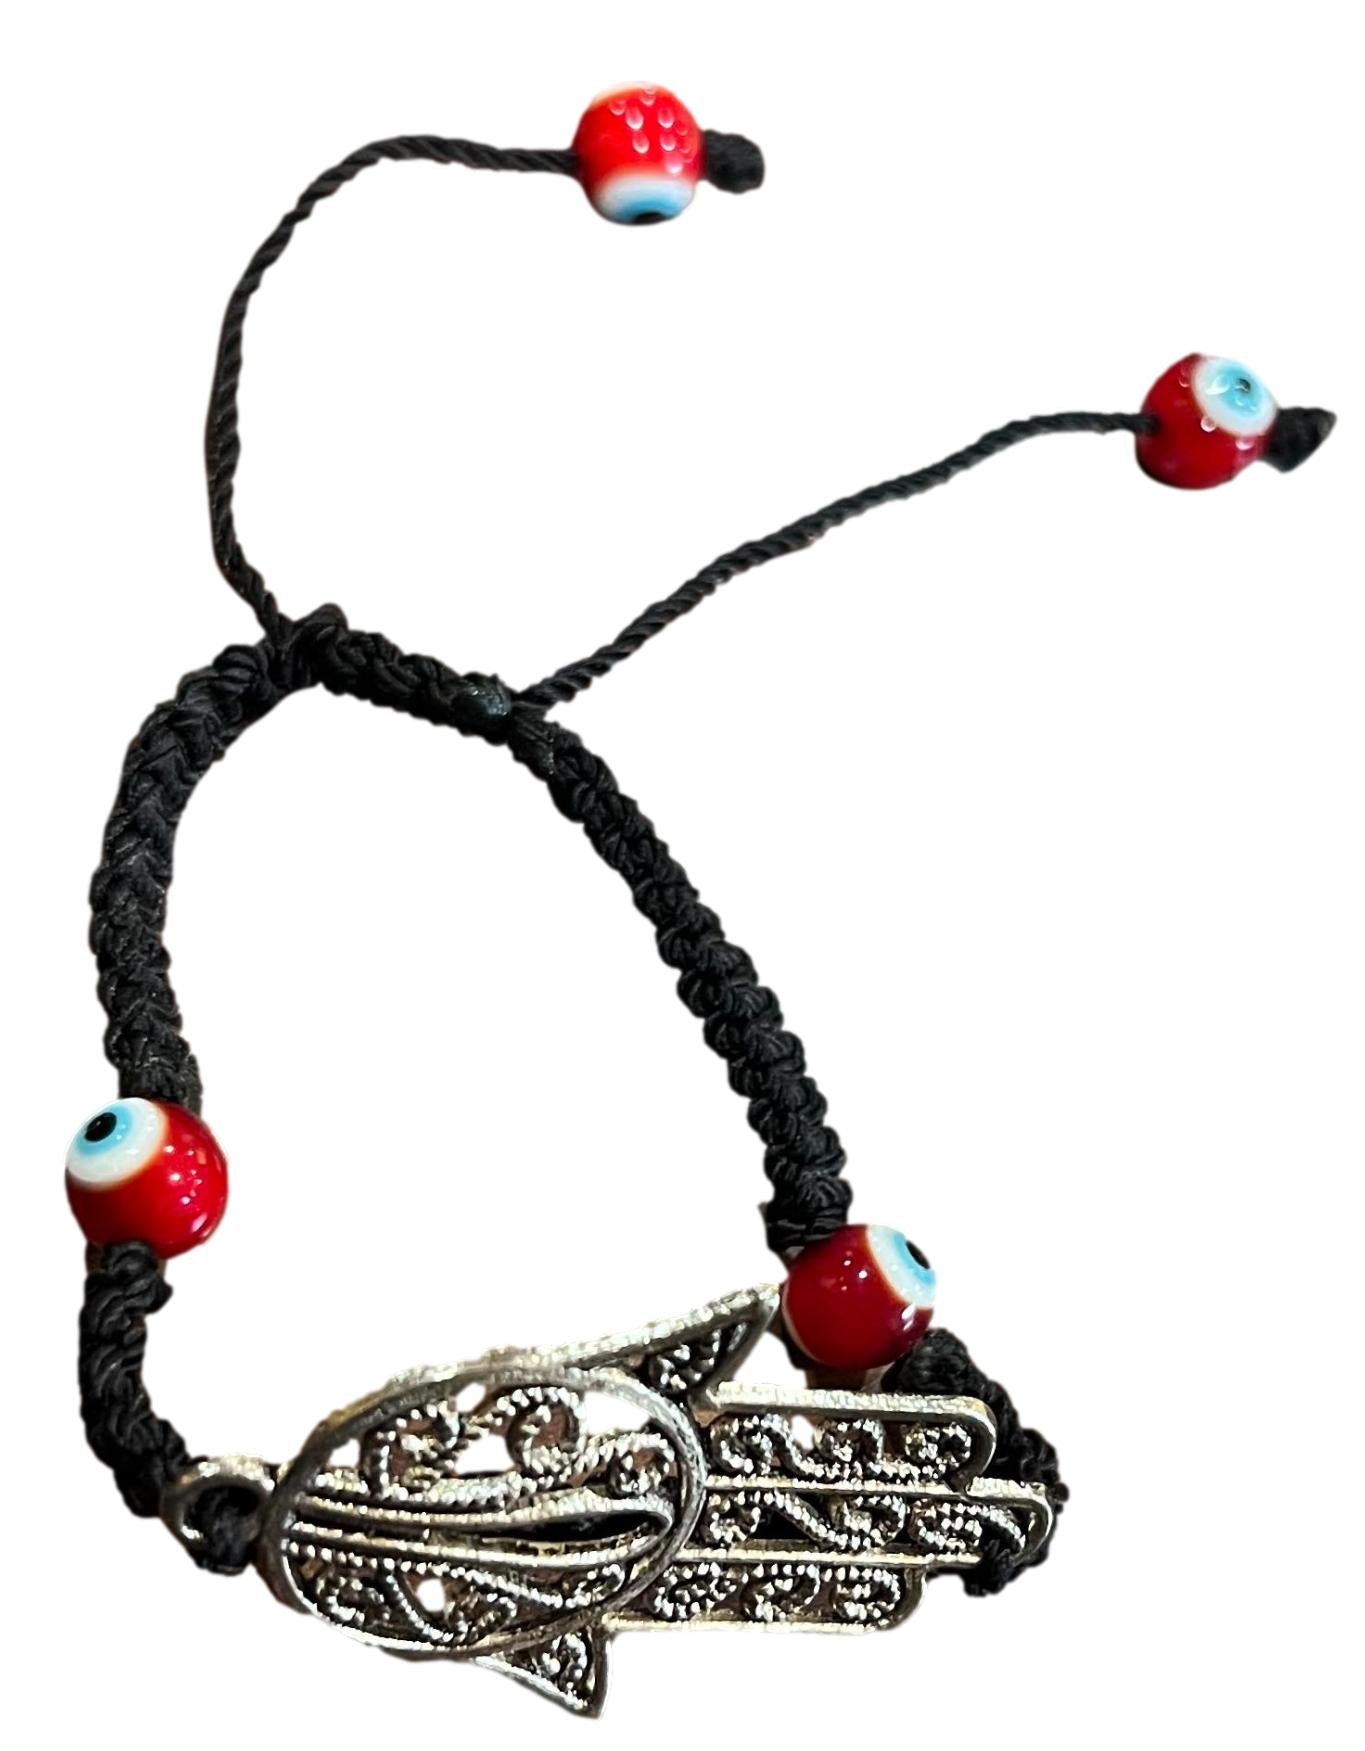 Bracelet Mal Ojo Red With Hand Stregnth, Power, Protection Black Woven Adjustible